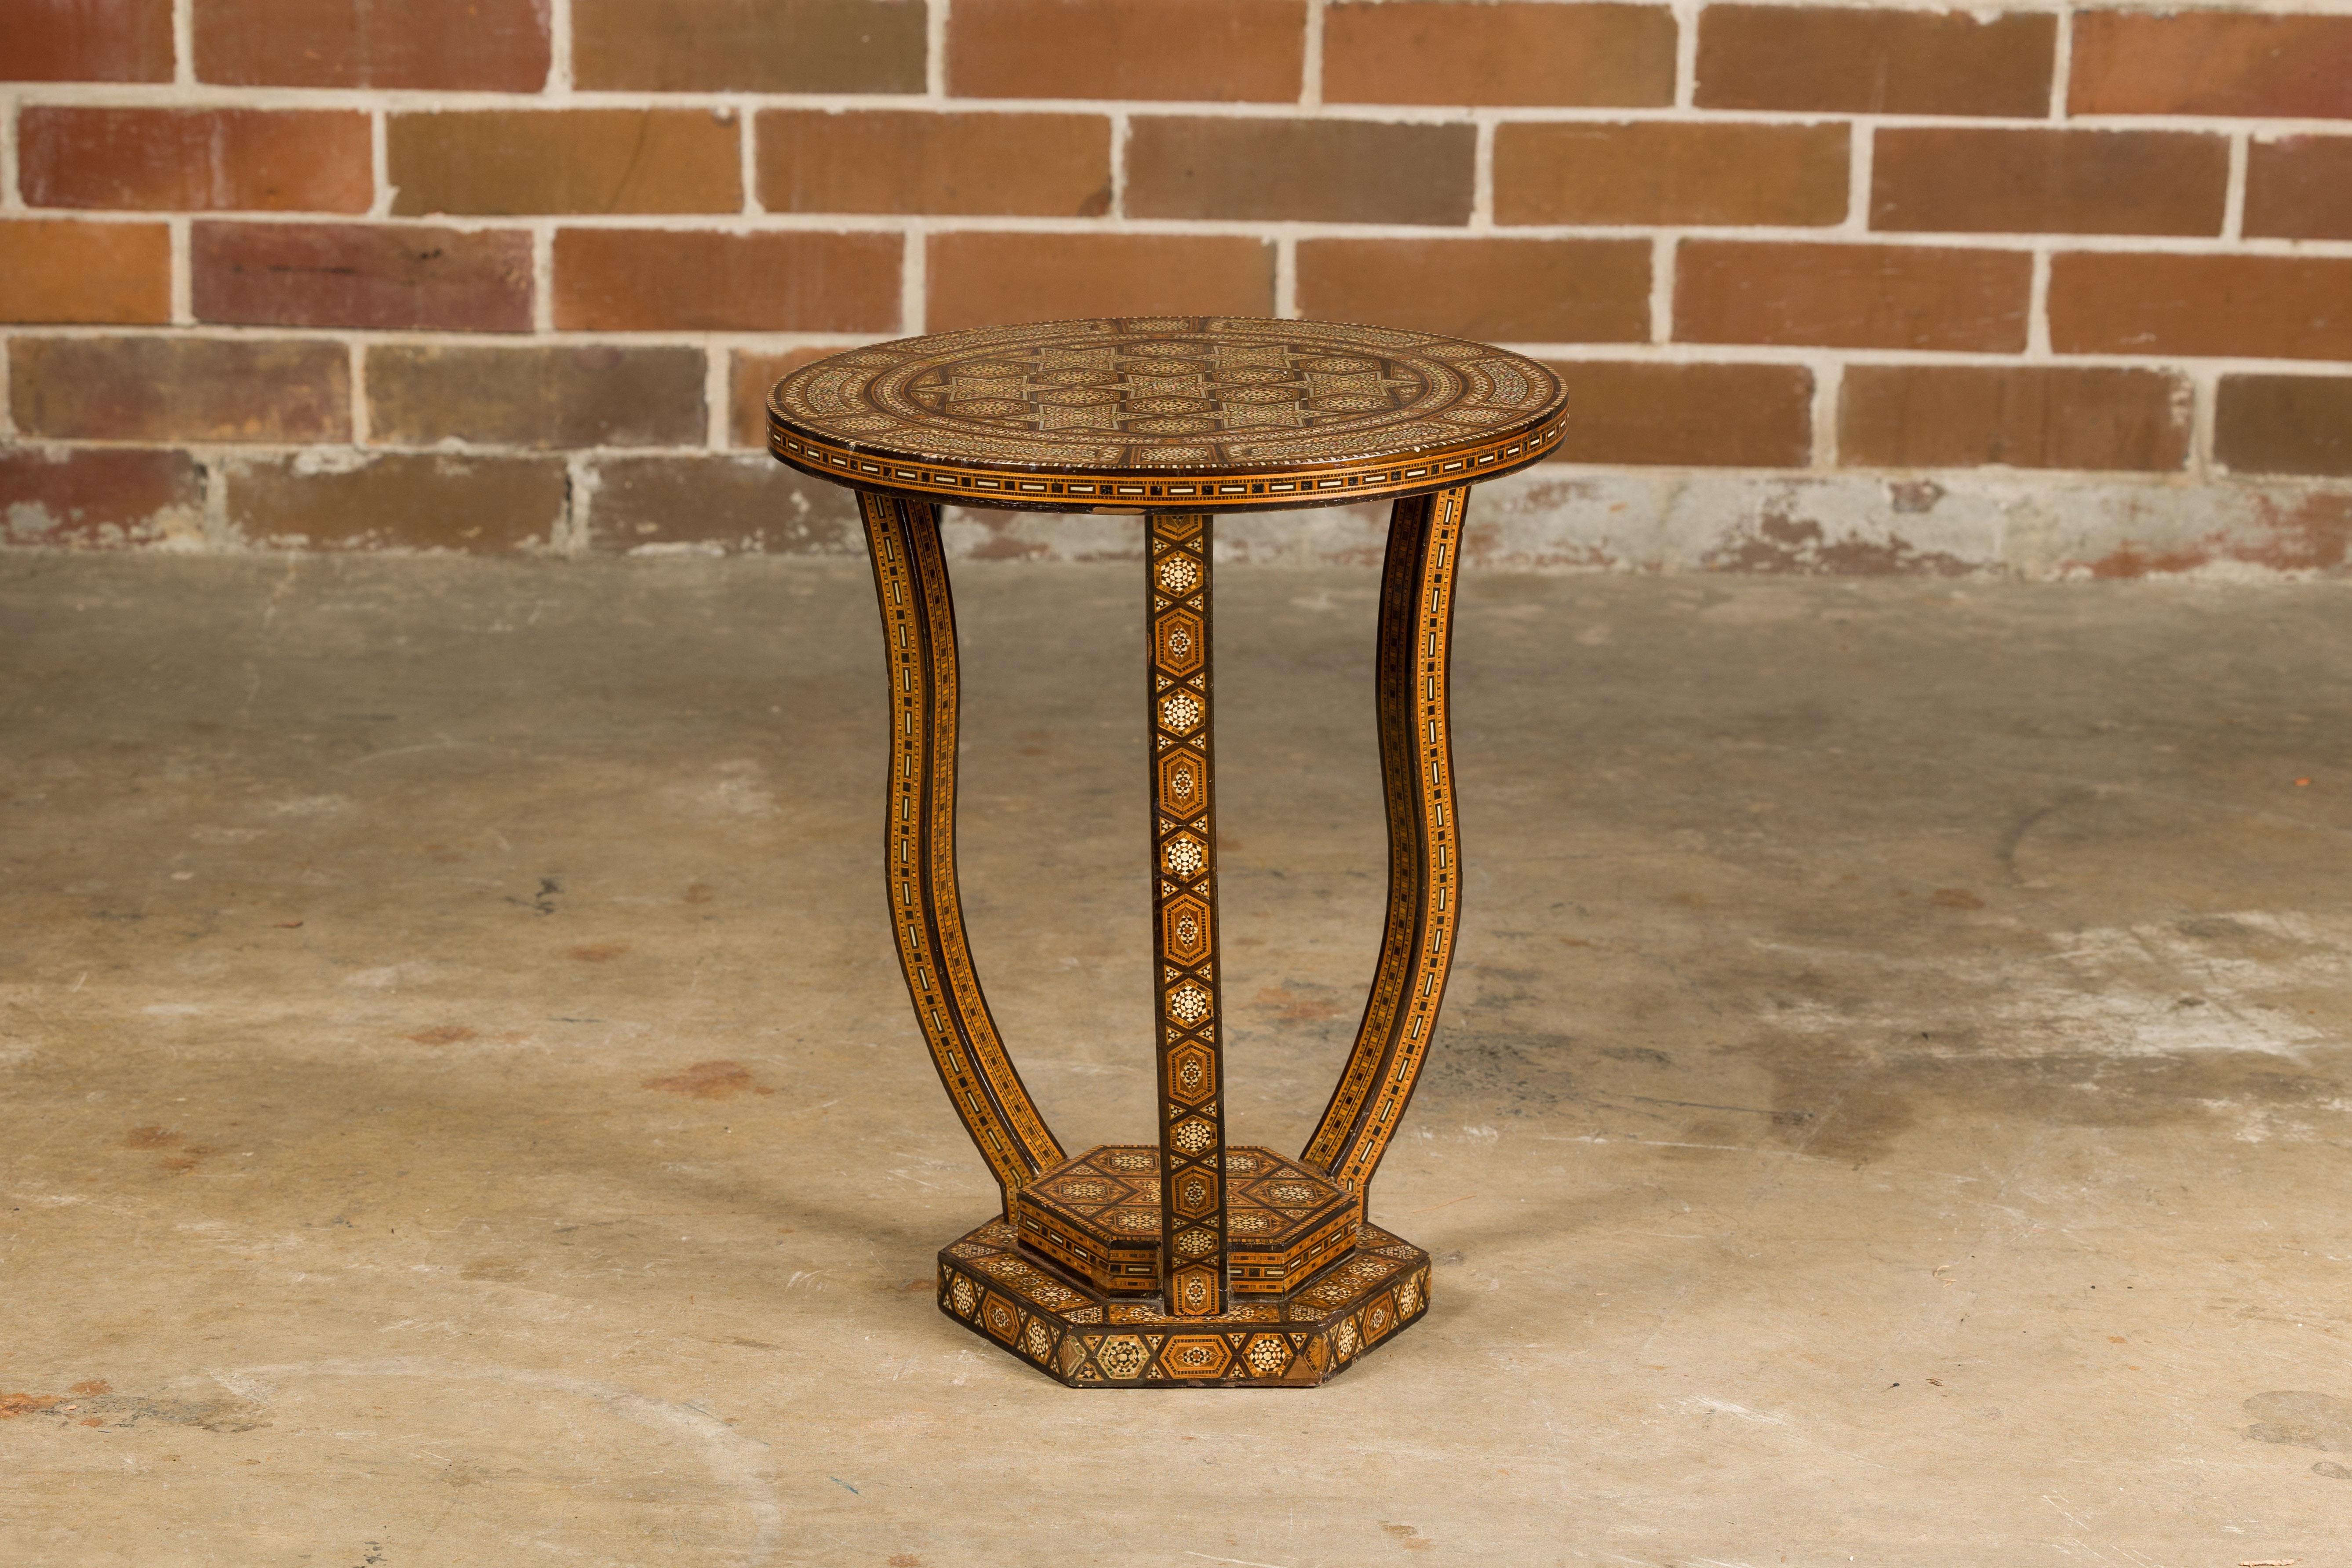 20th Century Moroccan 1900s Moorish Style Table with Geometric Bone Inlay and Curving Legs For Sale